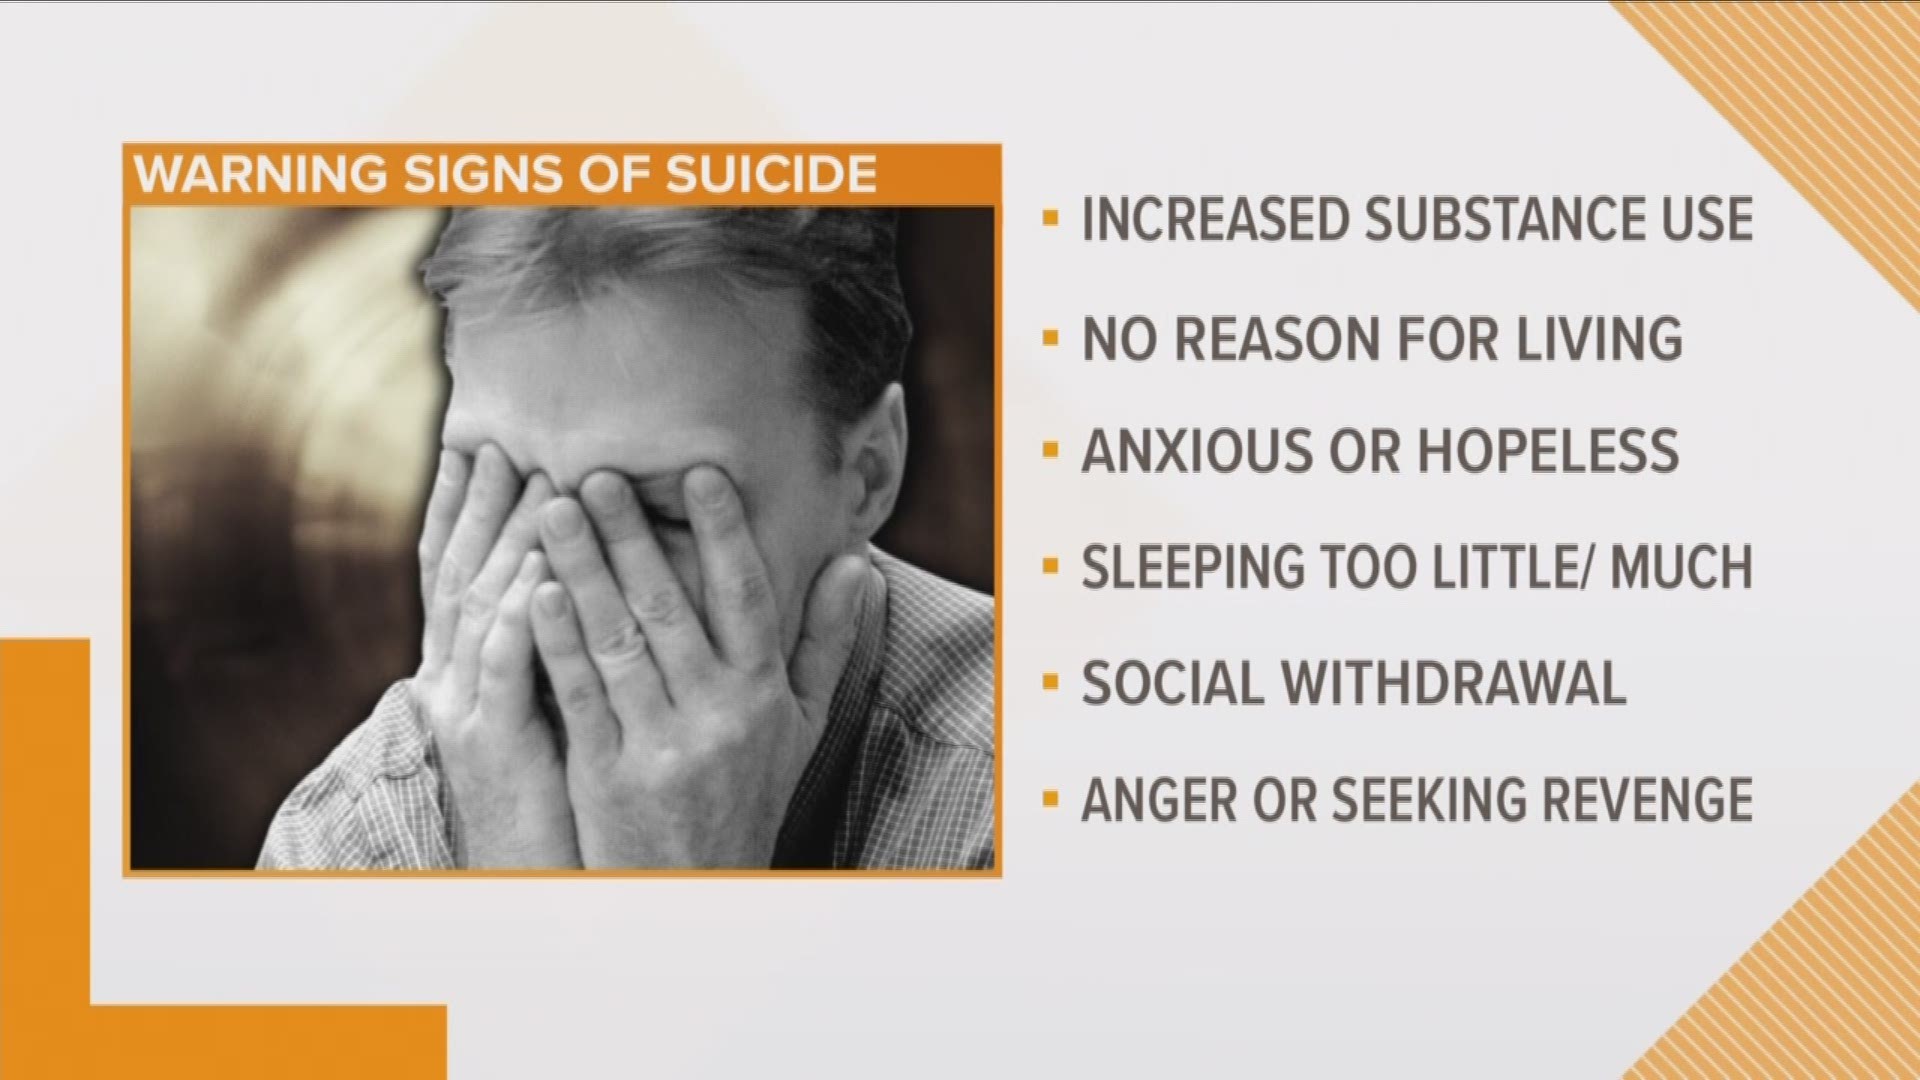 How To Spot The Warning Signs Of Suicide